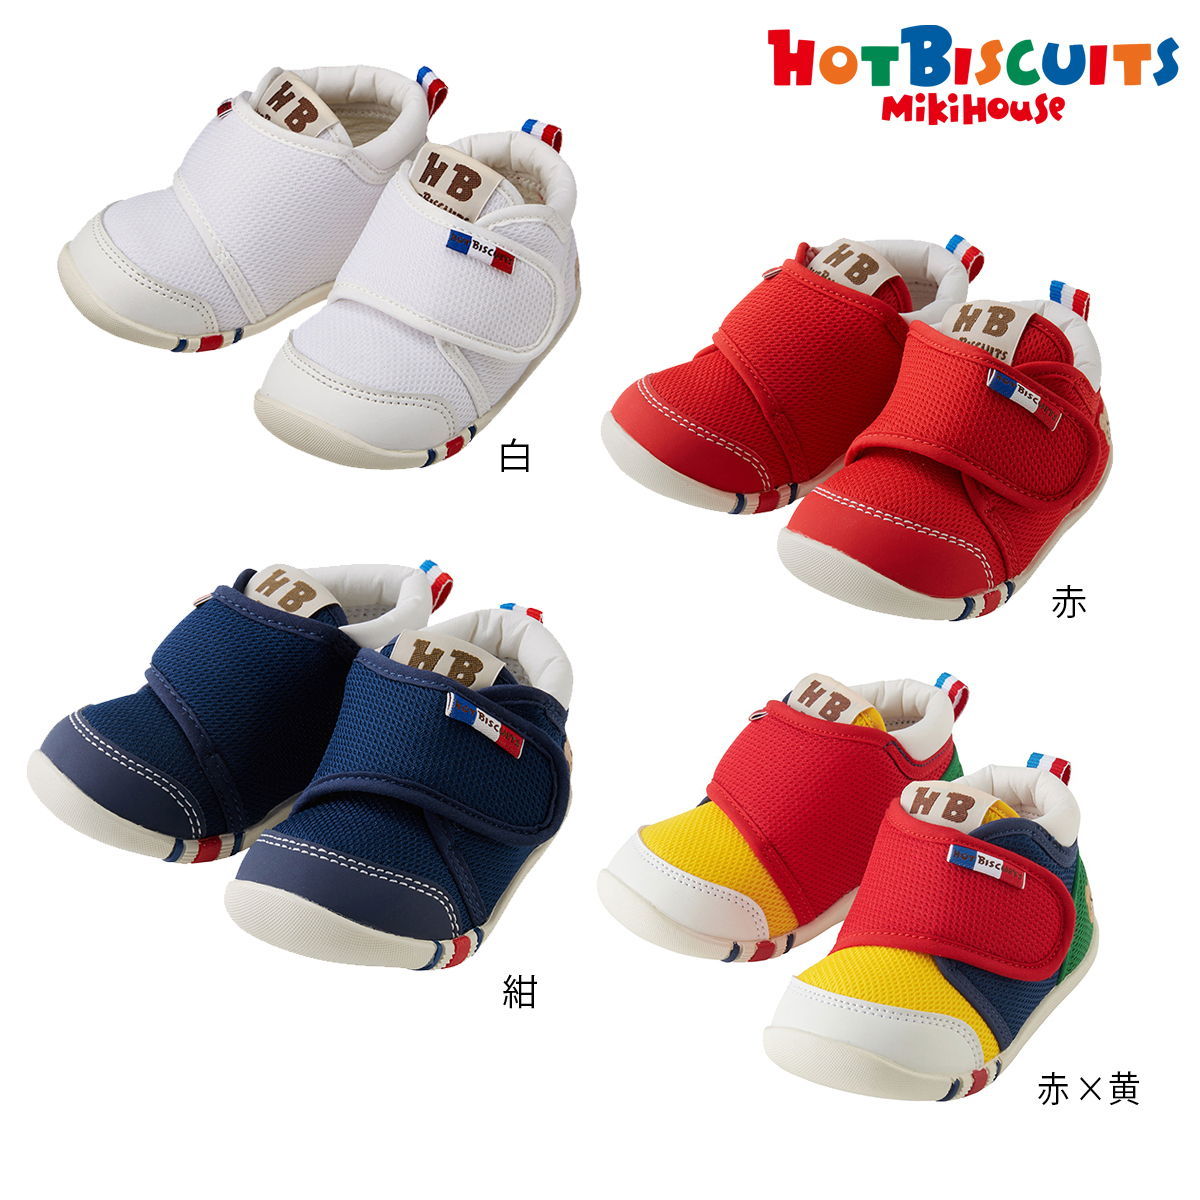  Miki House First shoes First baby shoes shoes shoes outlet white red navy blue red × yellow 12 13 11.5 12.5 hot screw ketsuHOT BISCUITS